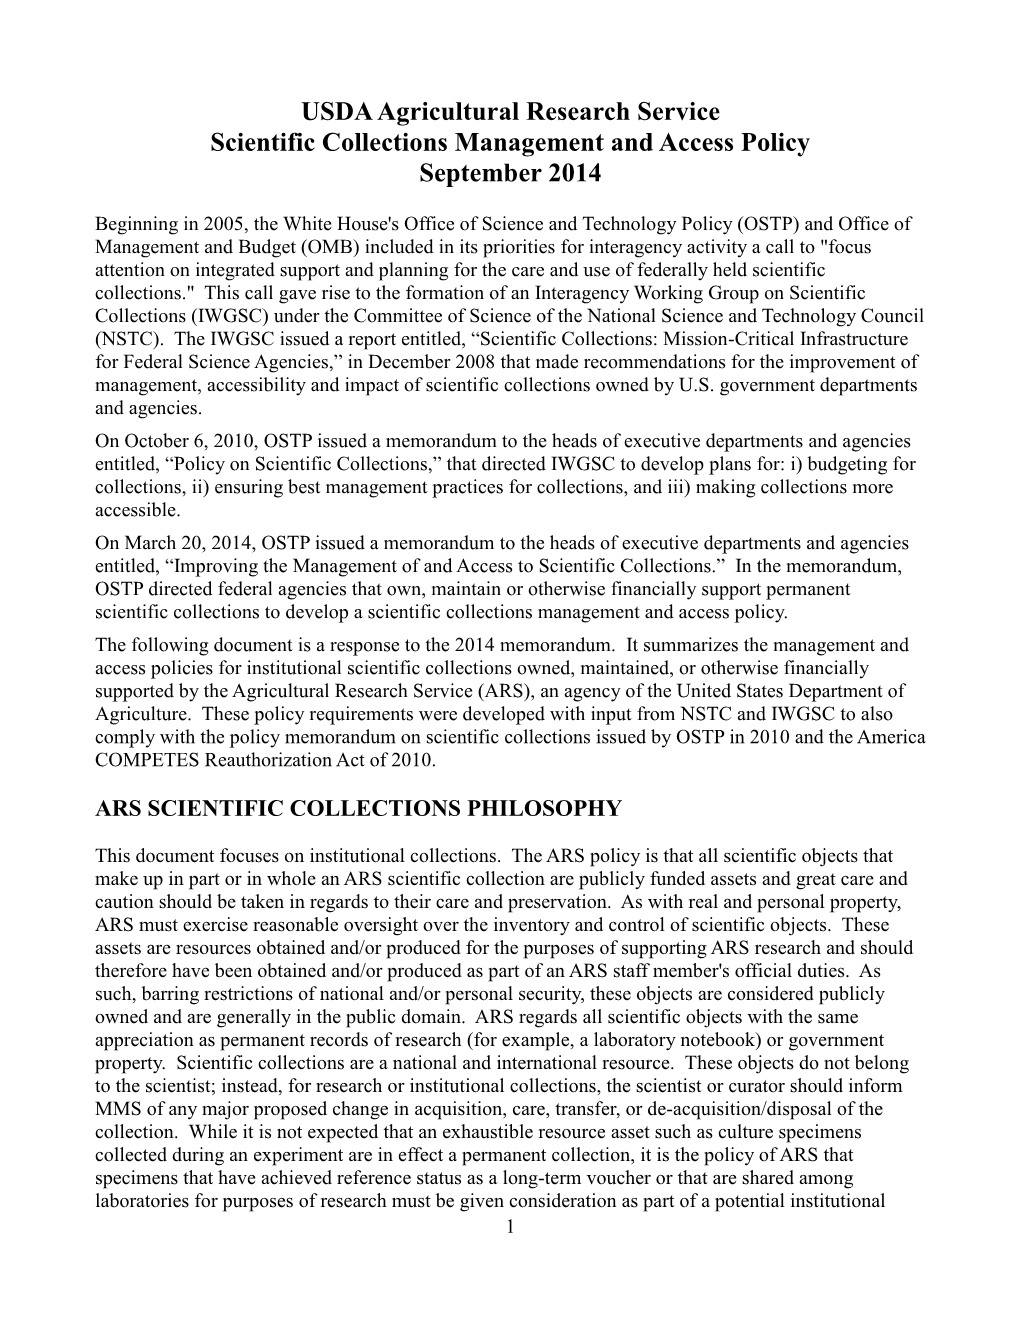 USDA Agricultural Research Service Scientific Collections Management and Access Policy September 2014